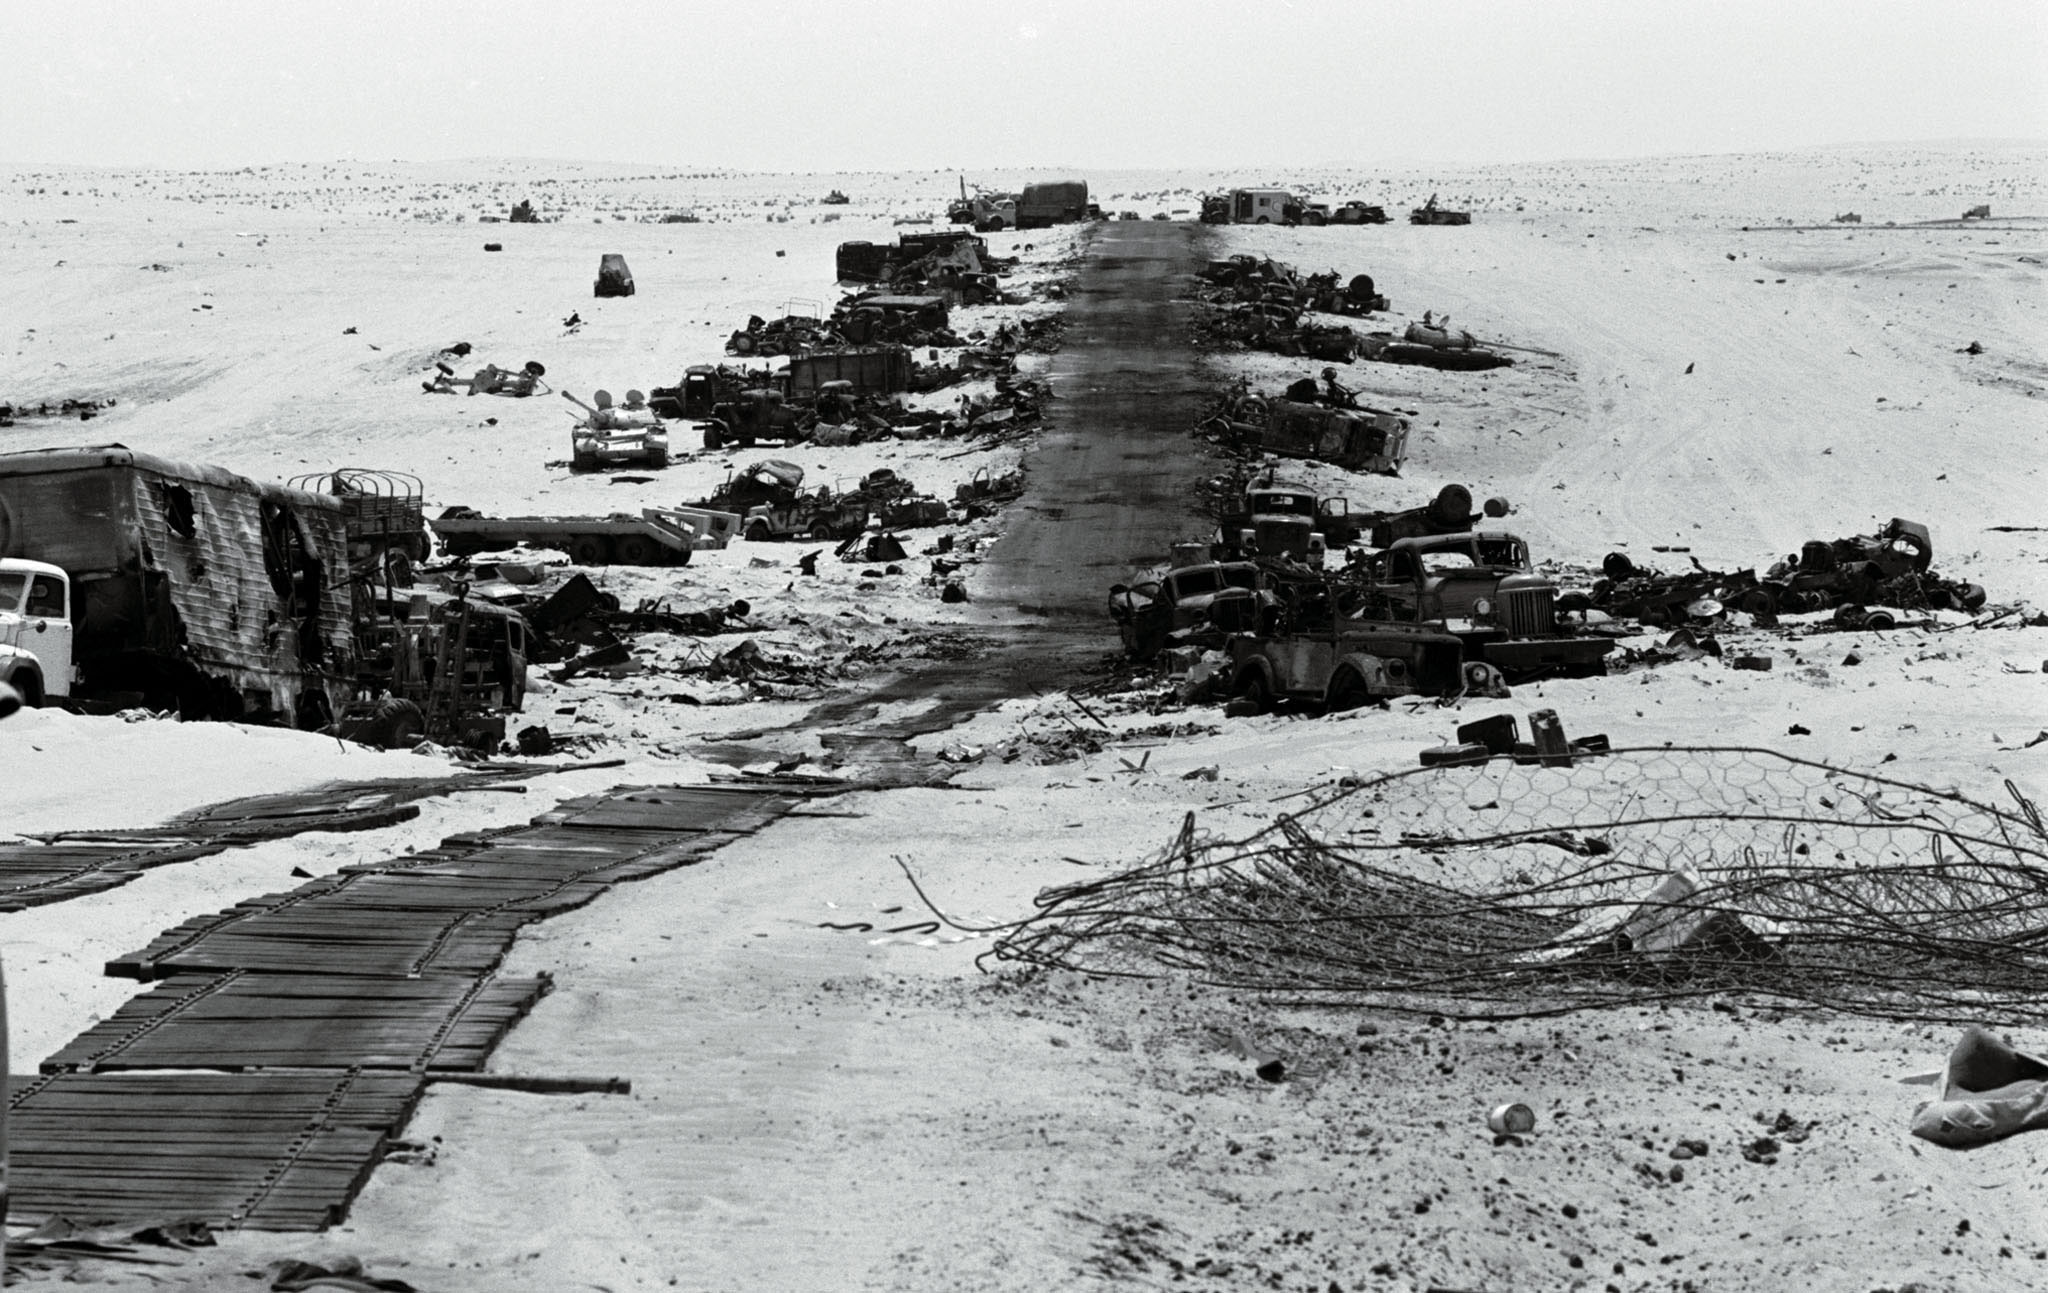 Destroyed Egyptian armour lines the sides of a Sinai road after it was hit by Israeli jet fighters during the 1967 Six Day War.   REUTERS